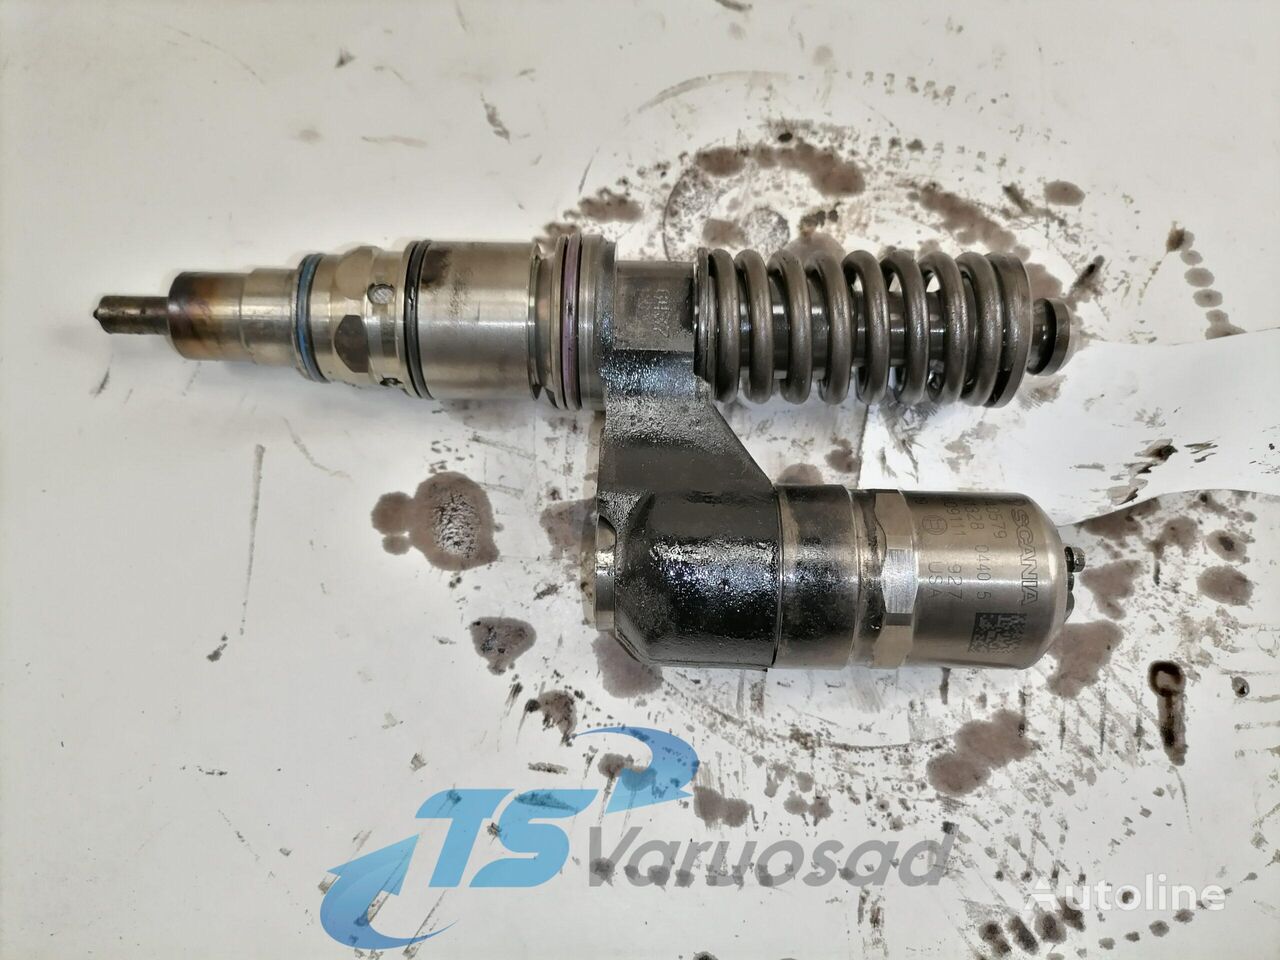 Scania Injector 1440579 for Scania P380 truck tractor